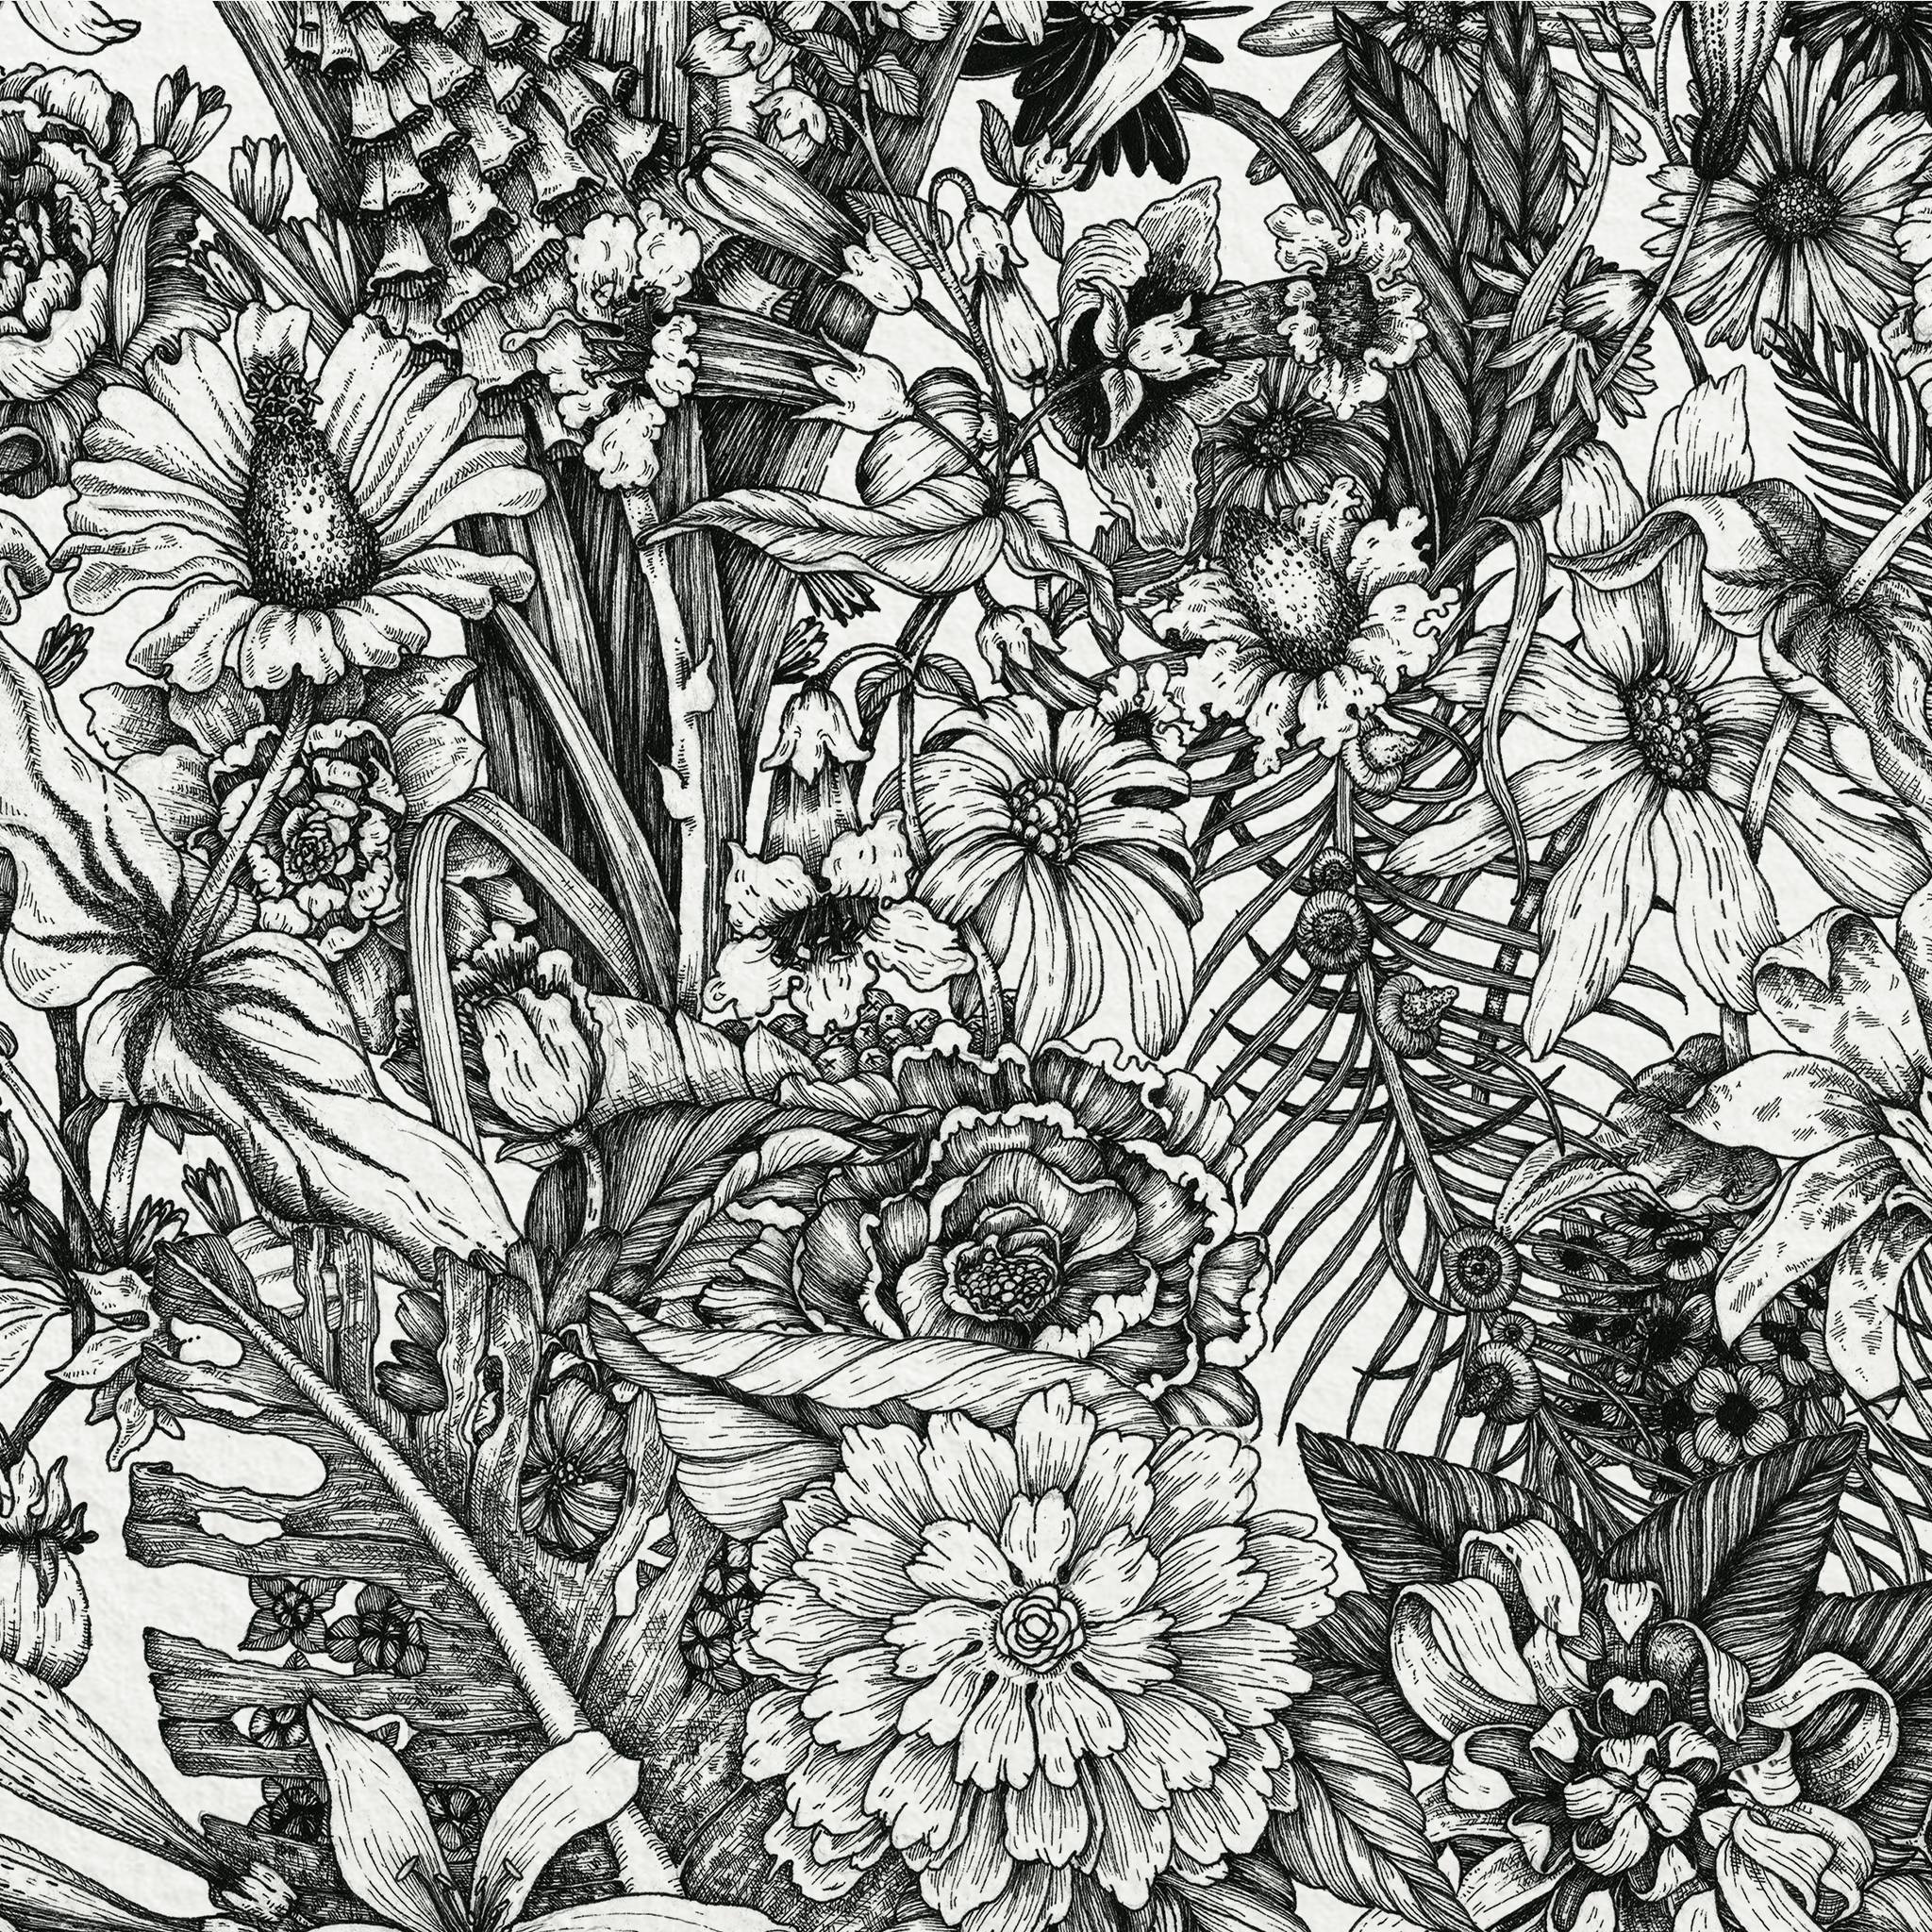 Black and white illustration for a pattern